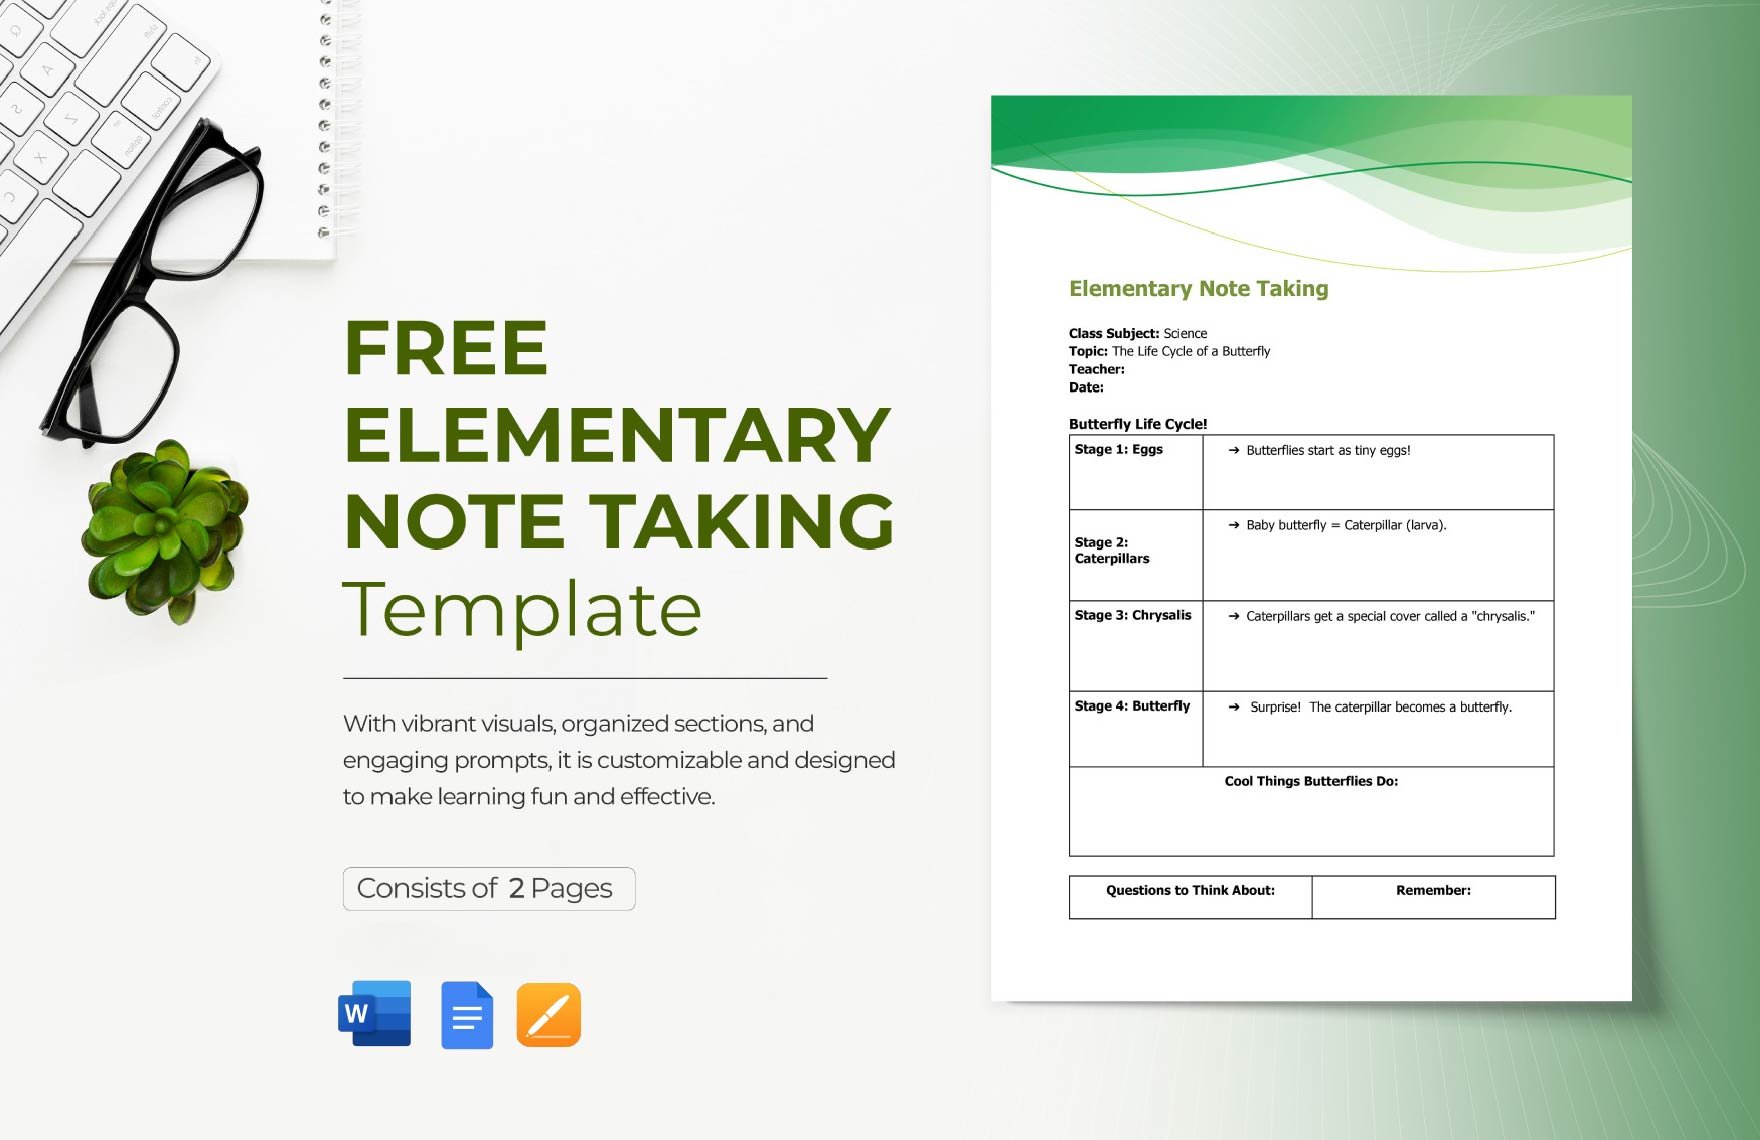 Elementary Note Taking Template